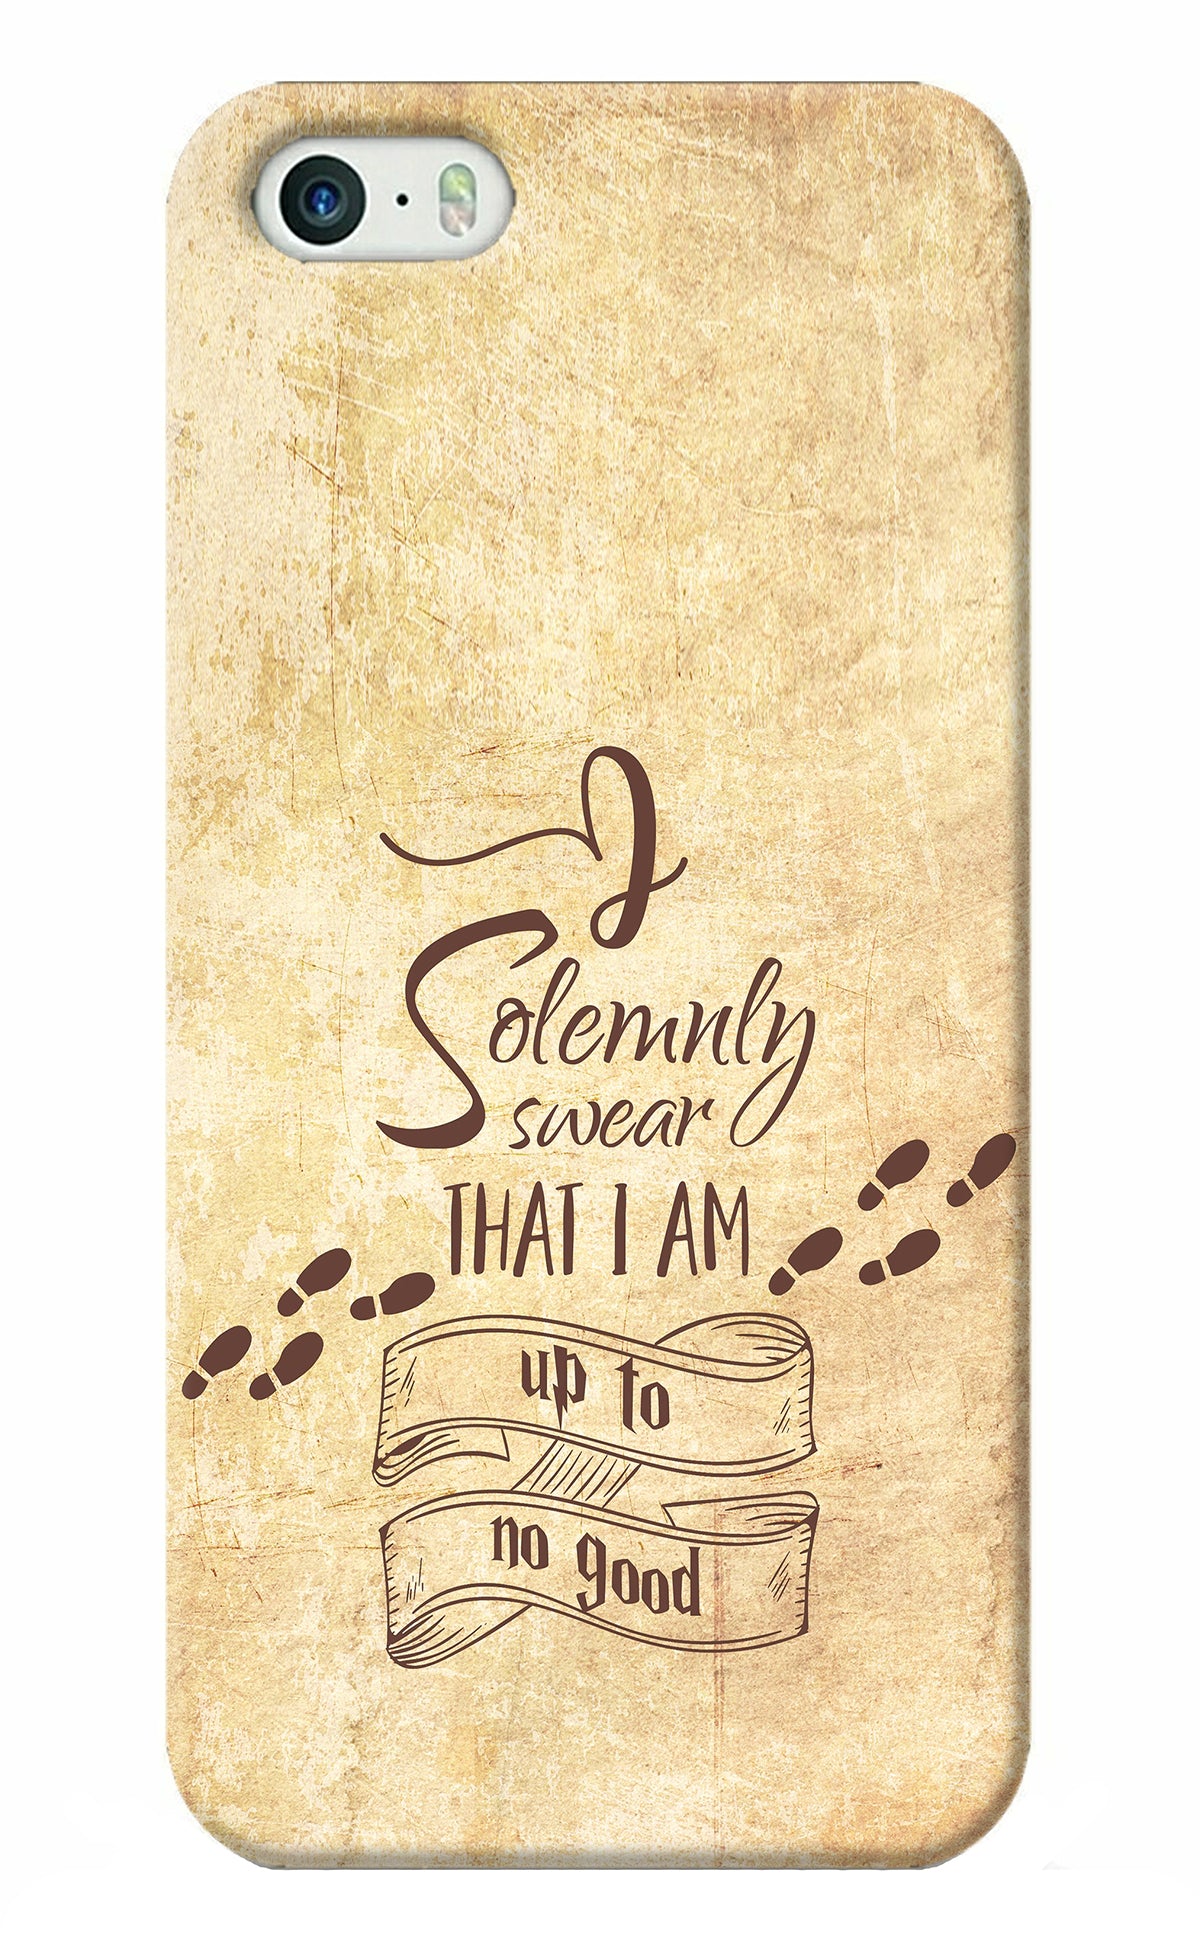 I Solemnly swear that i up to no good iPhone 5/5s Back Cover